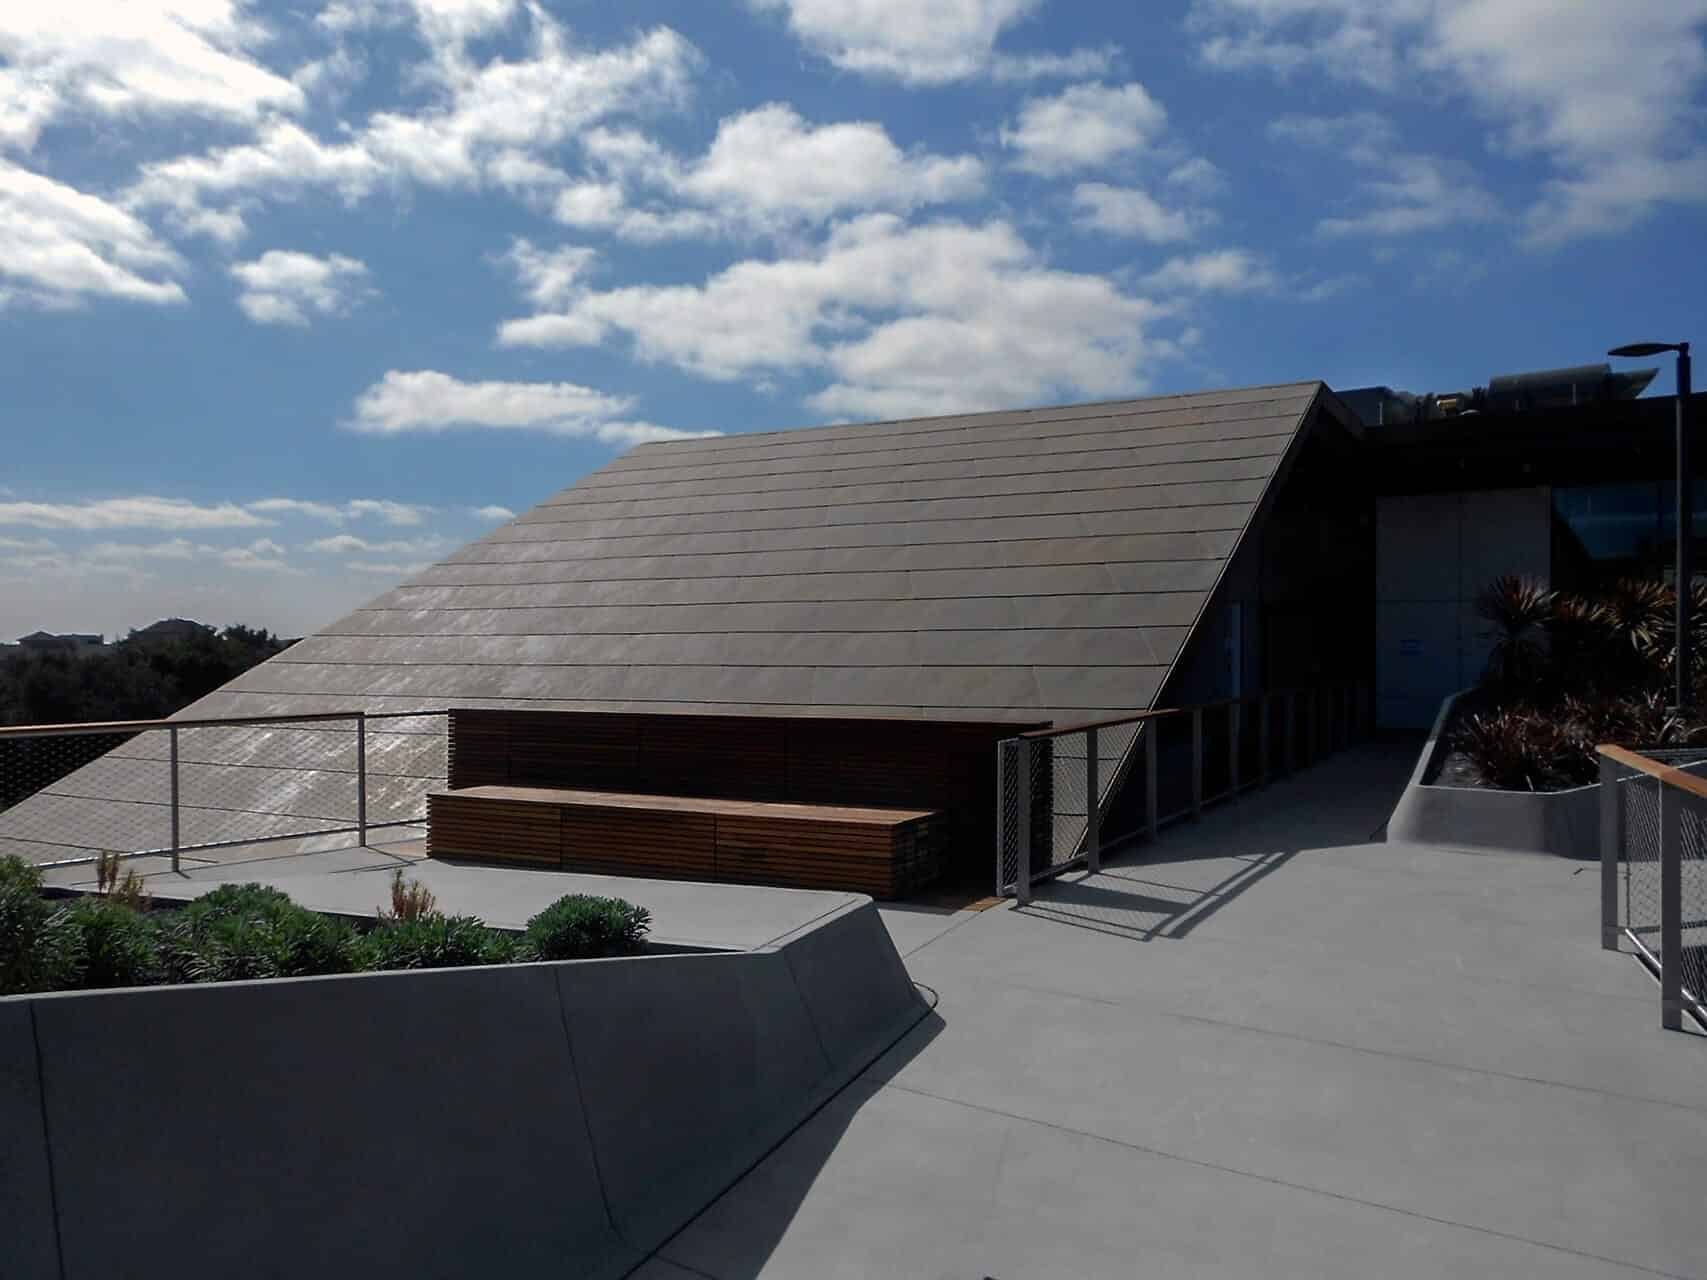 Zinc roof with a custom patina, McMurtry Building in California.